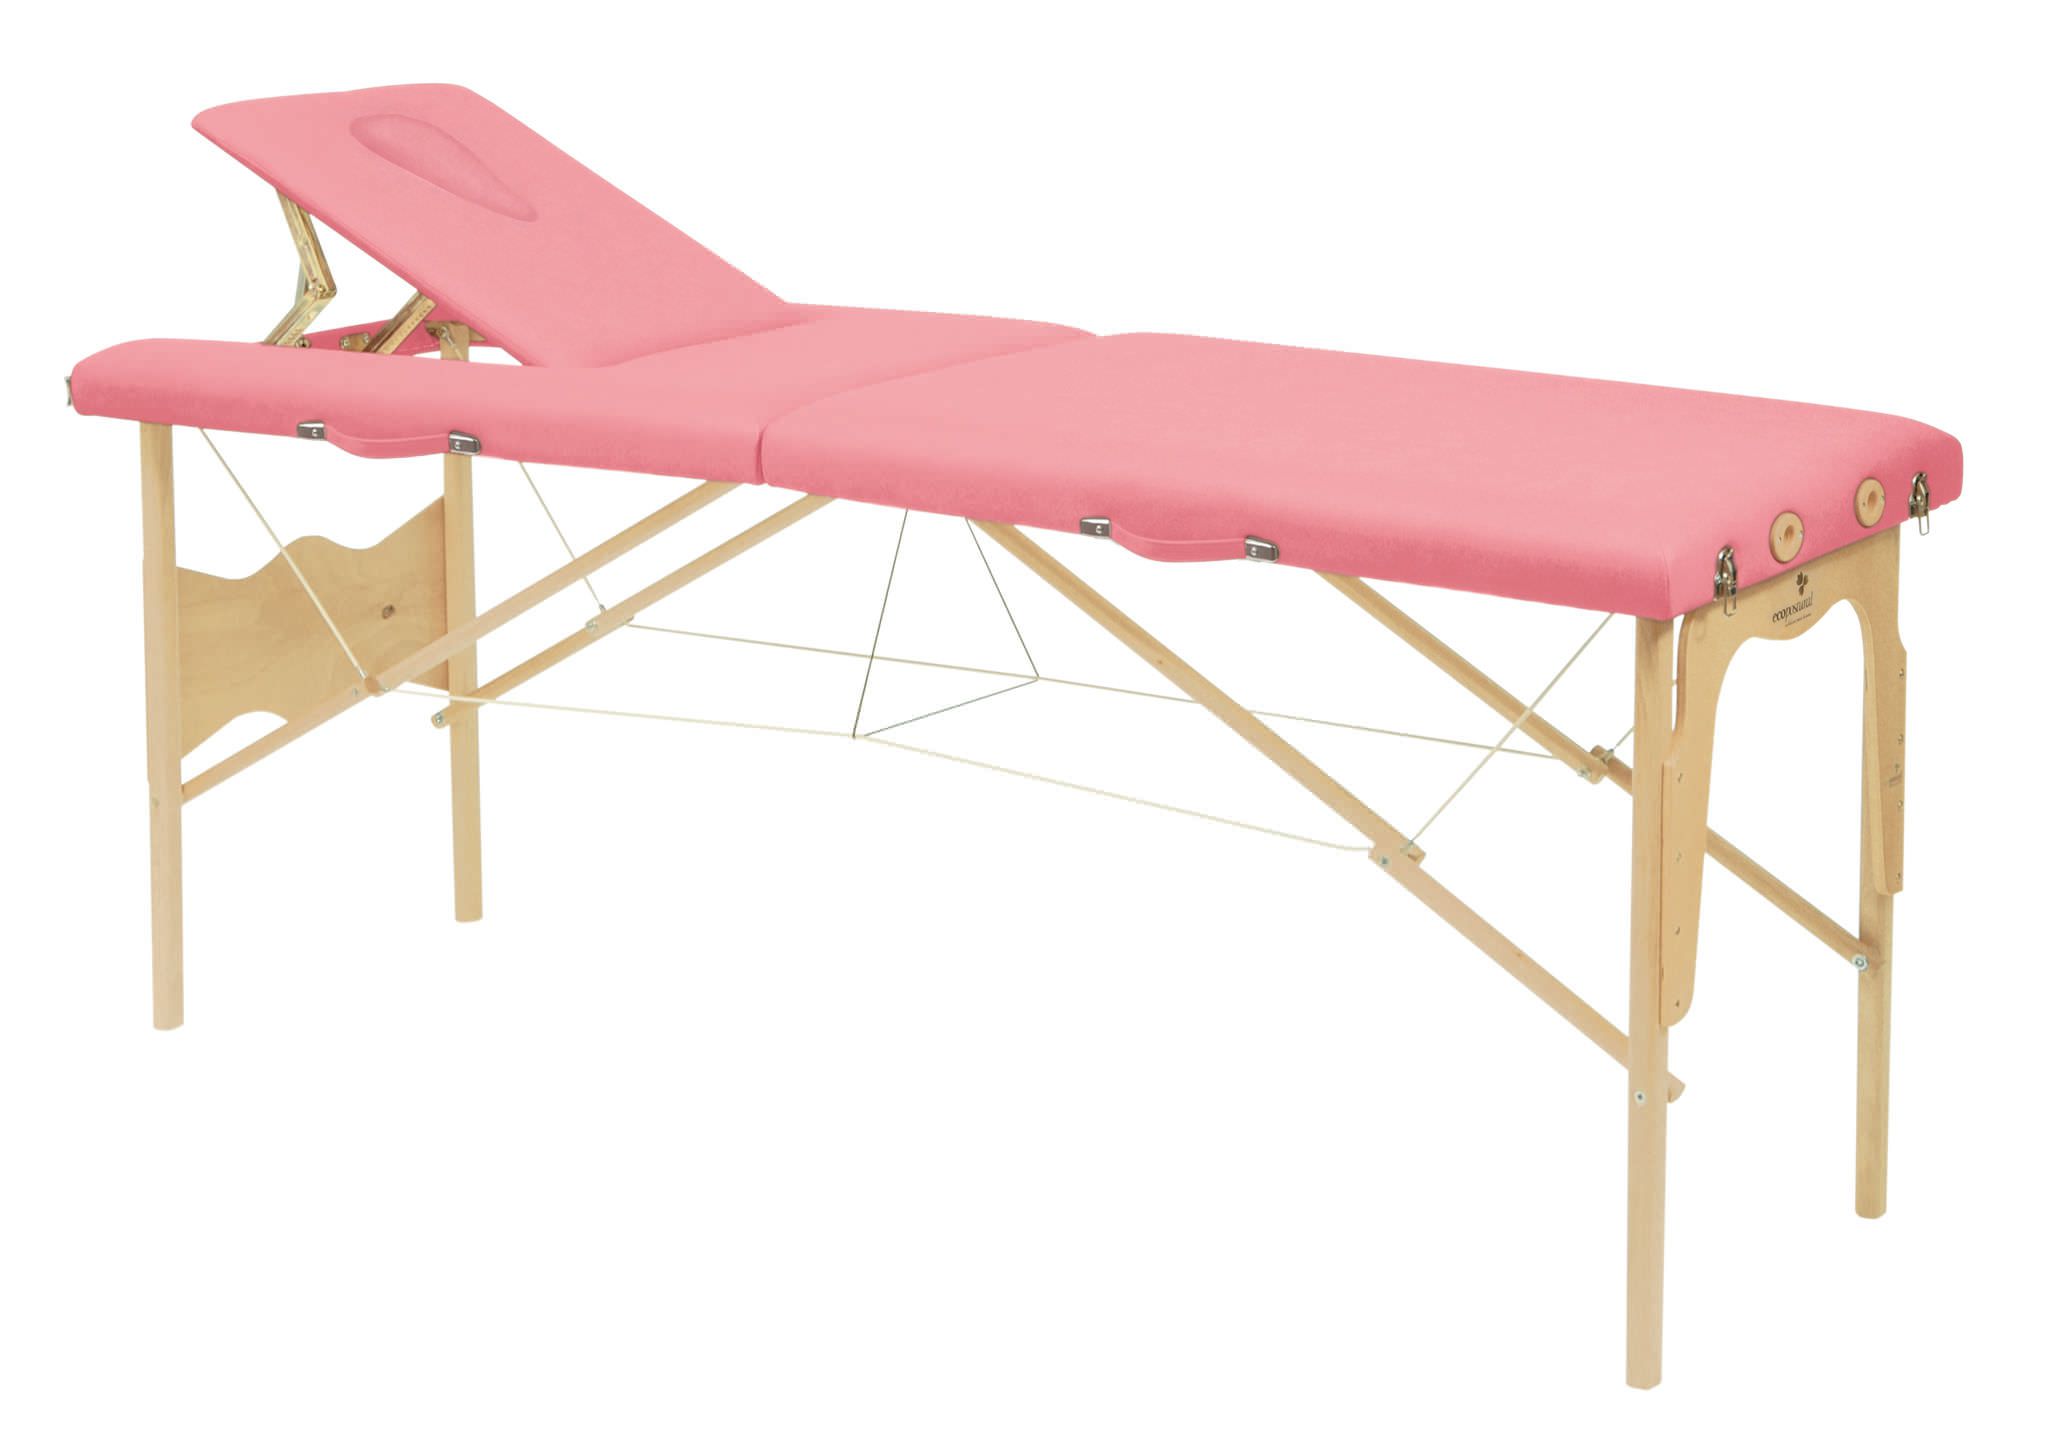 Manual massage table / folding / portable / 2 sections C-3215-M41 Ecopostural